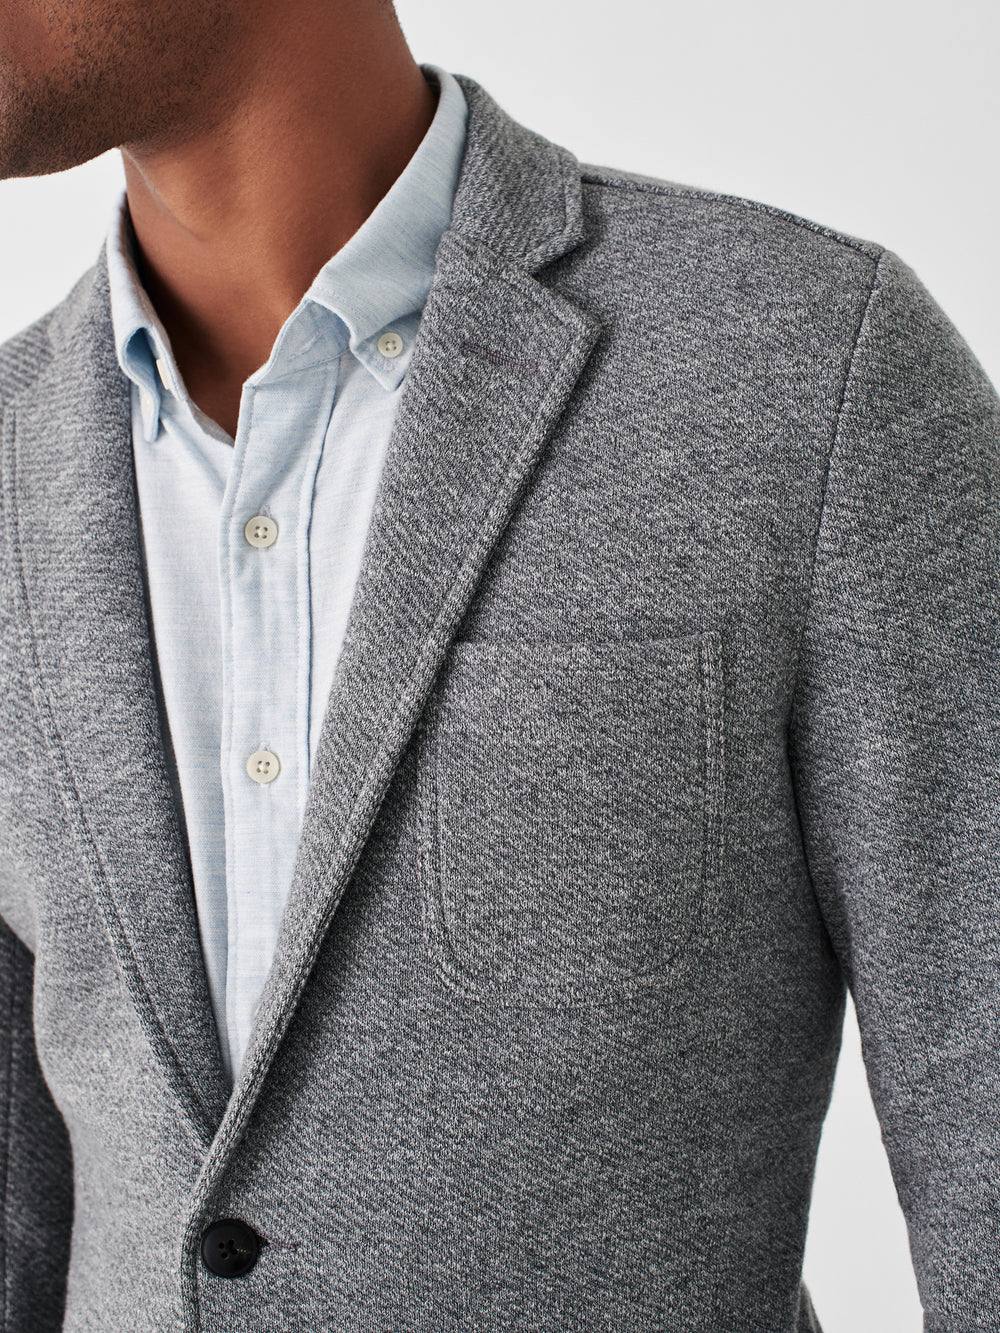 Knit Blazer for Tall Men in Mid Heather Grey